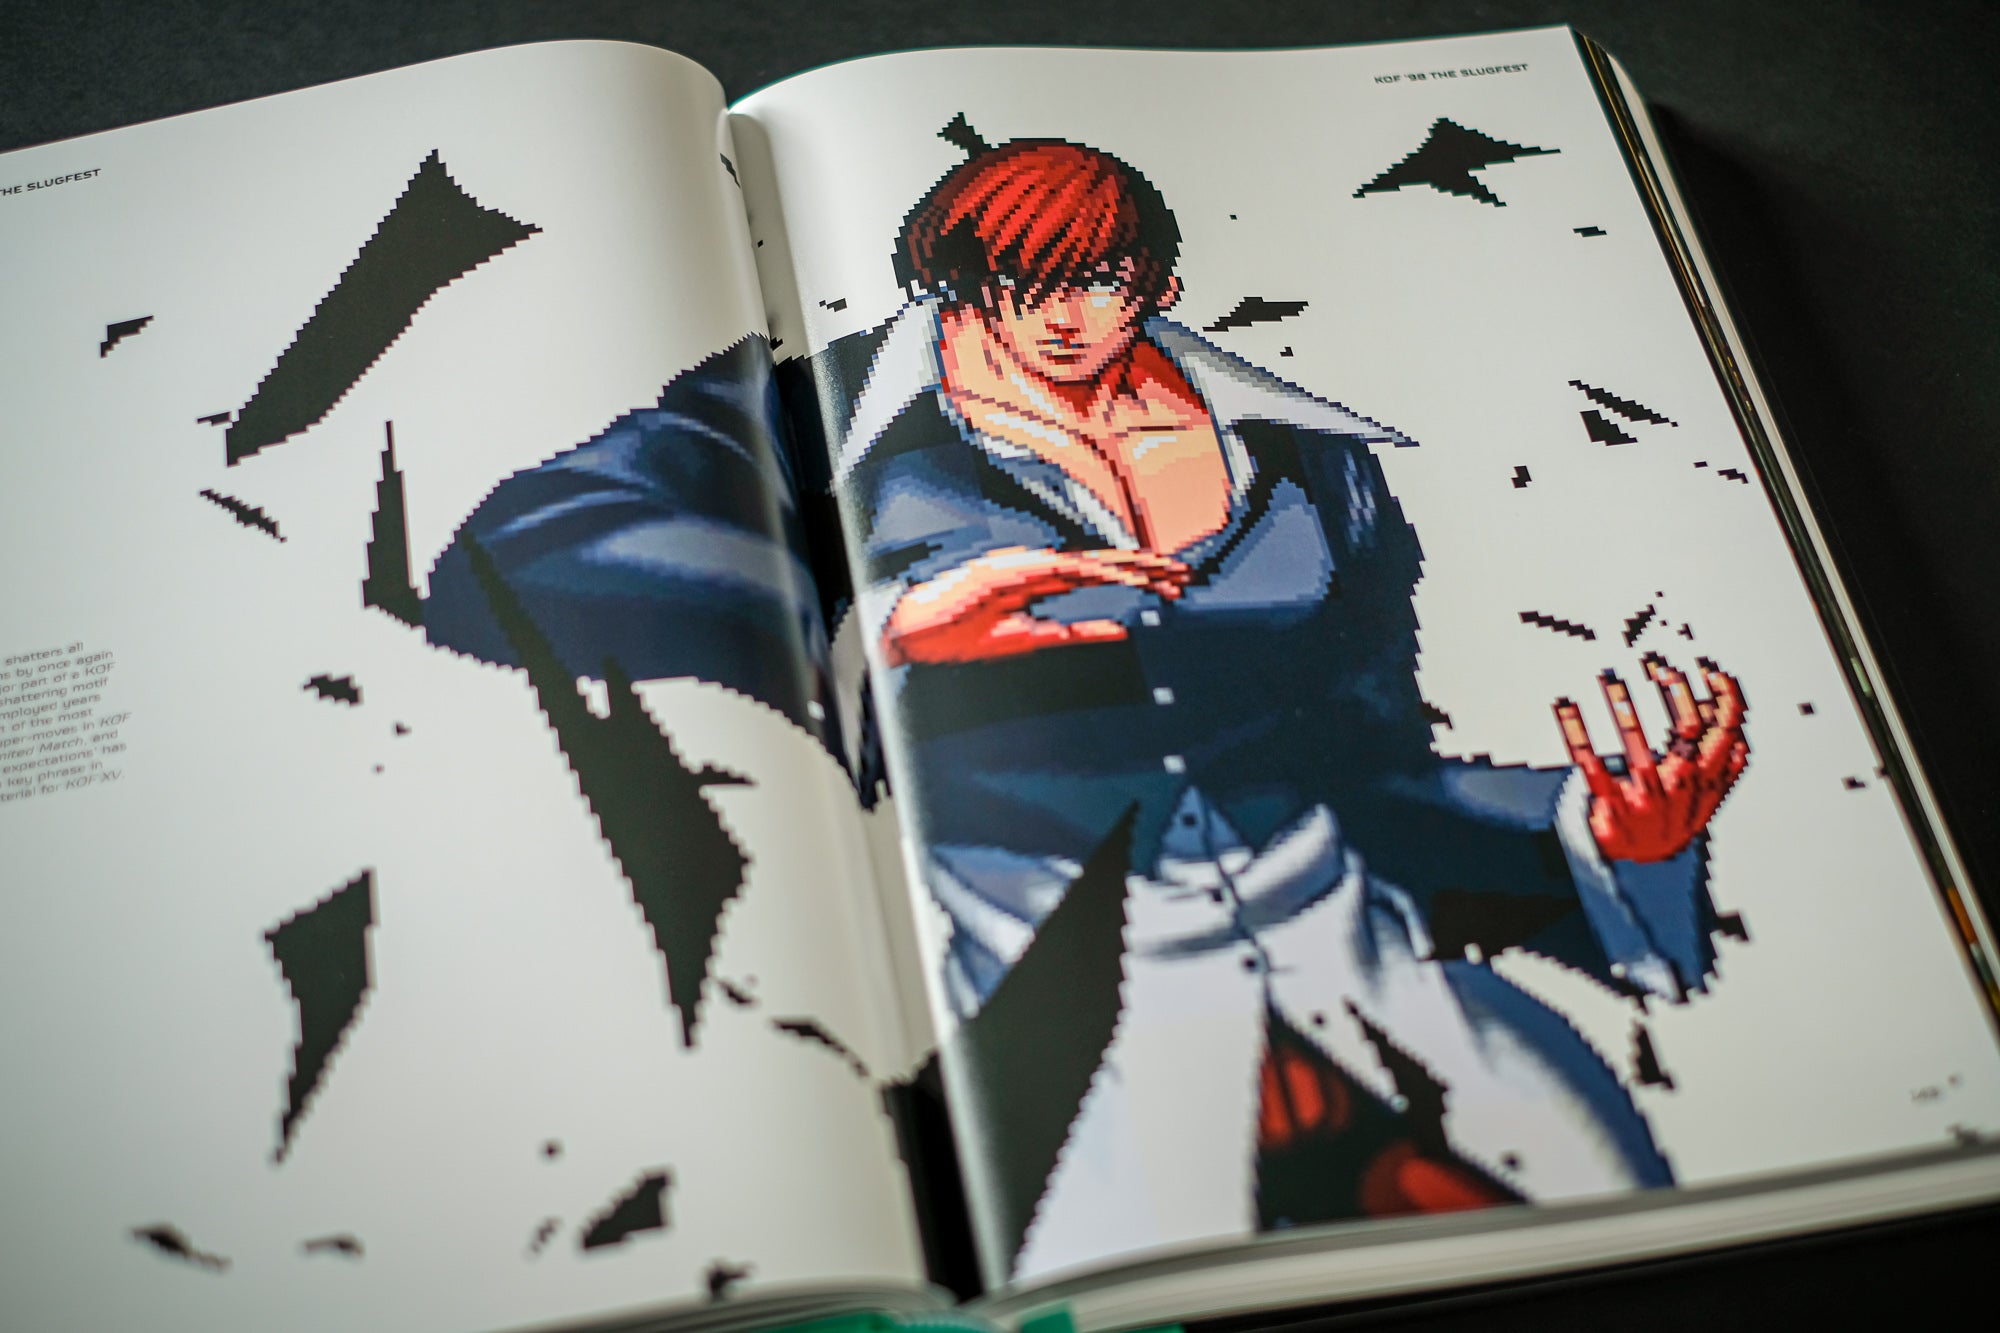 The King of Fighters 2001 - Manga Art